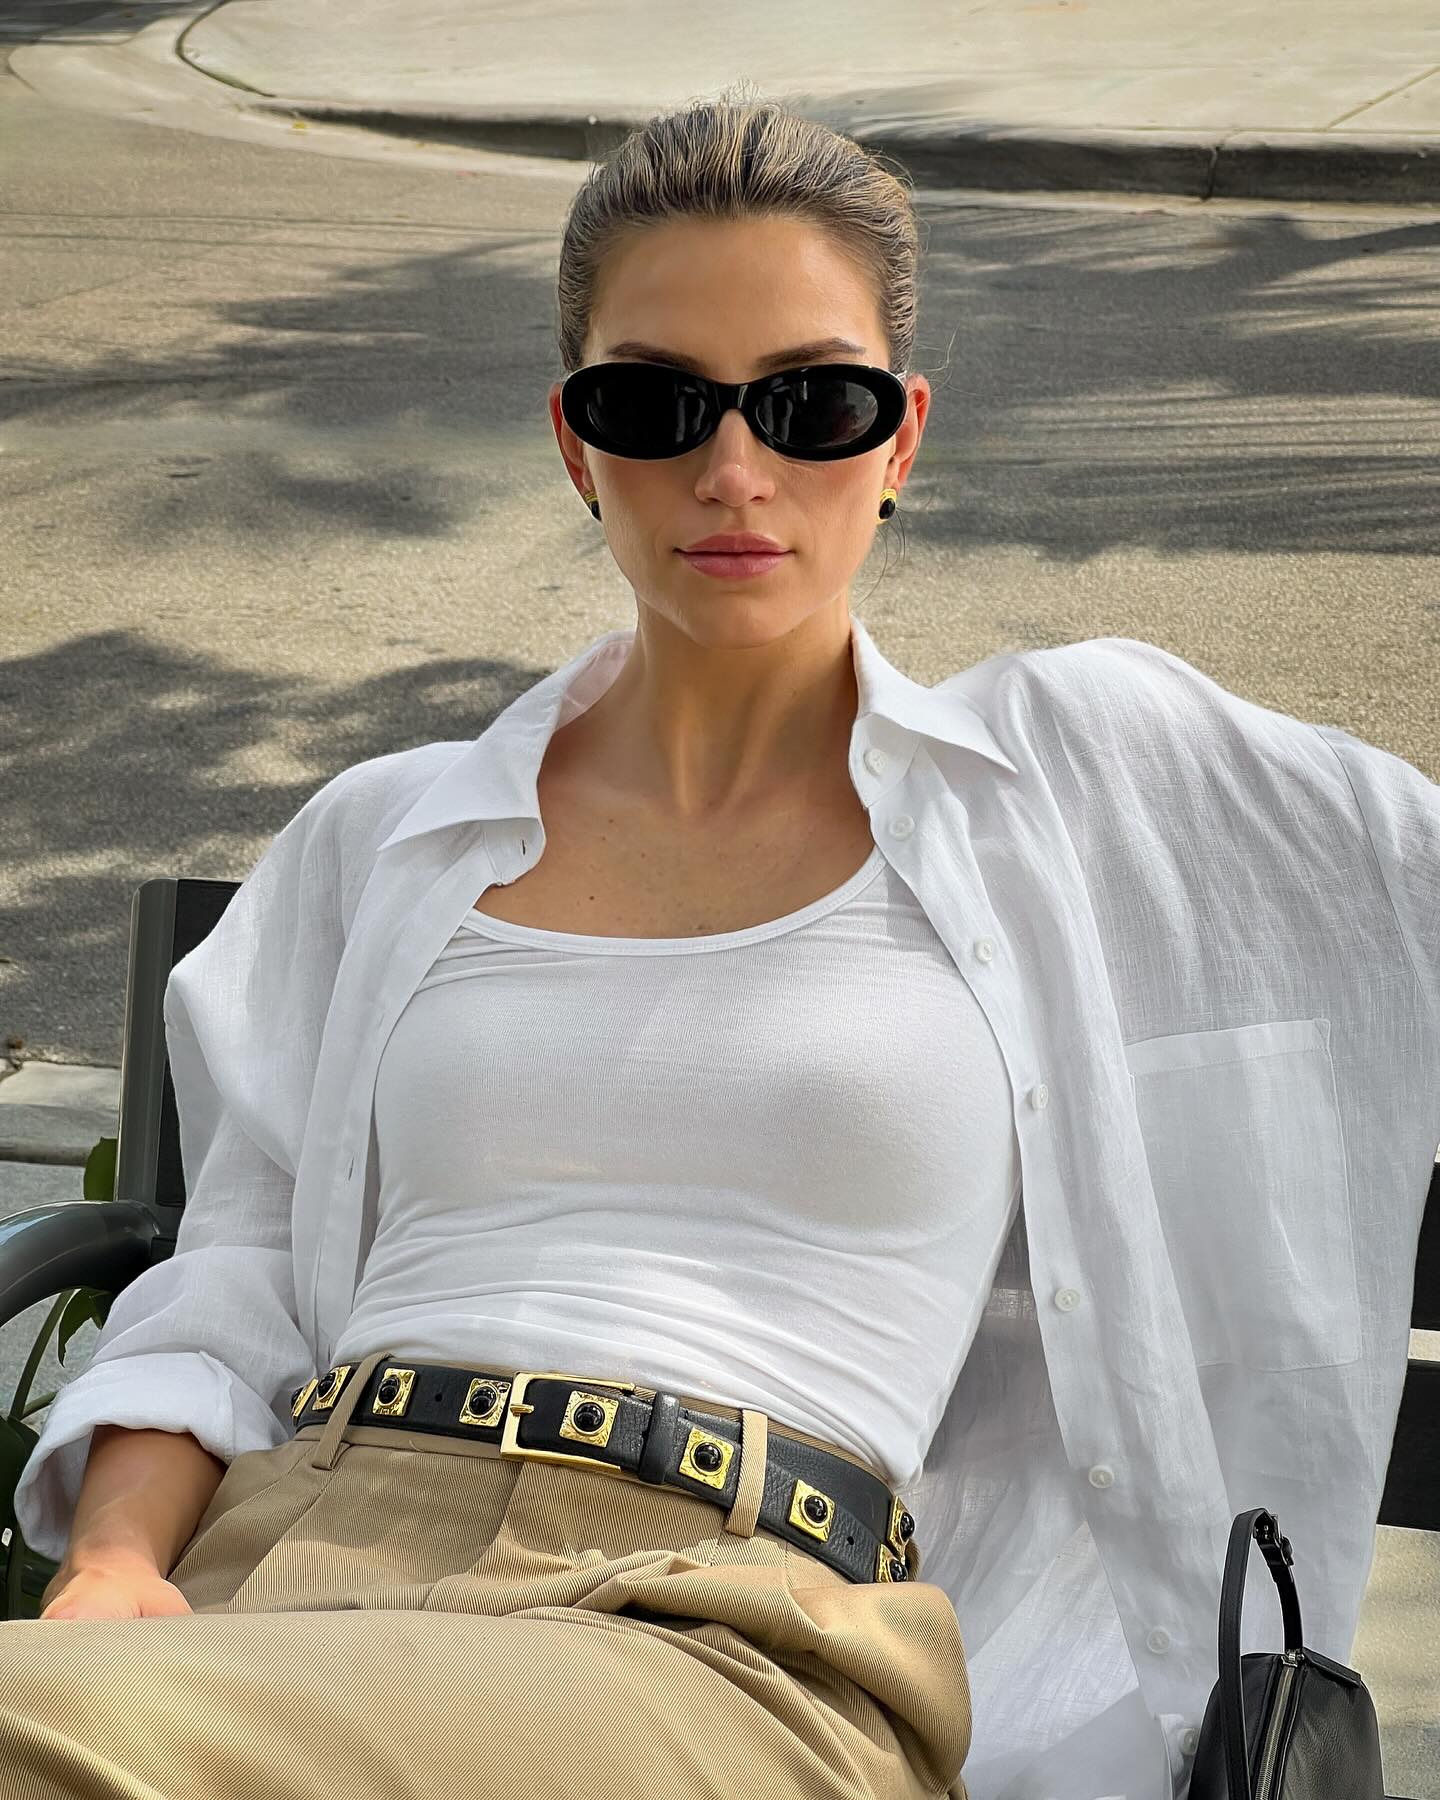 woman in sunglasses, white shirt, and tank top